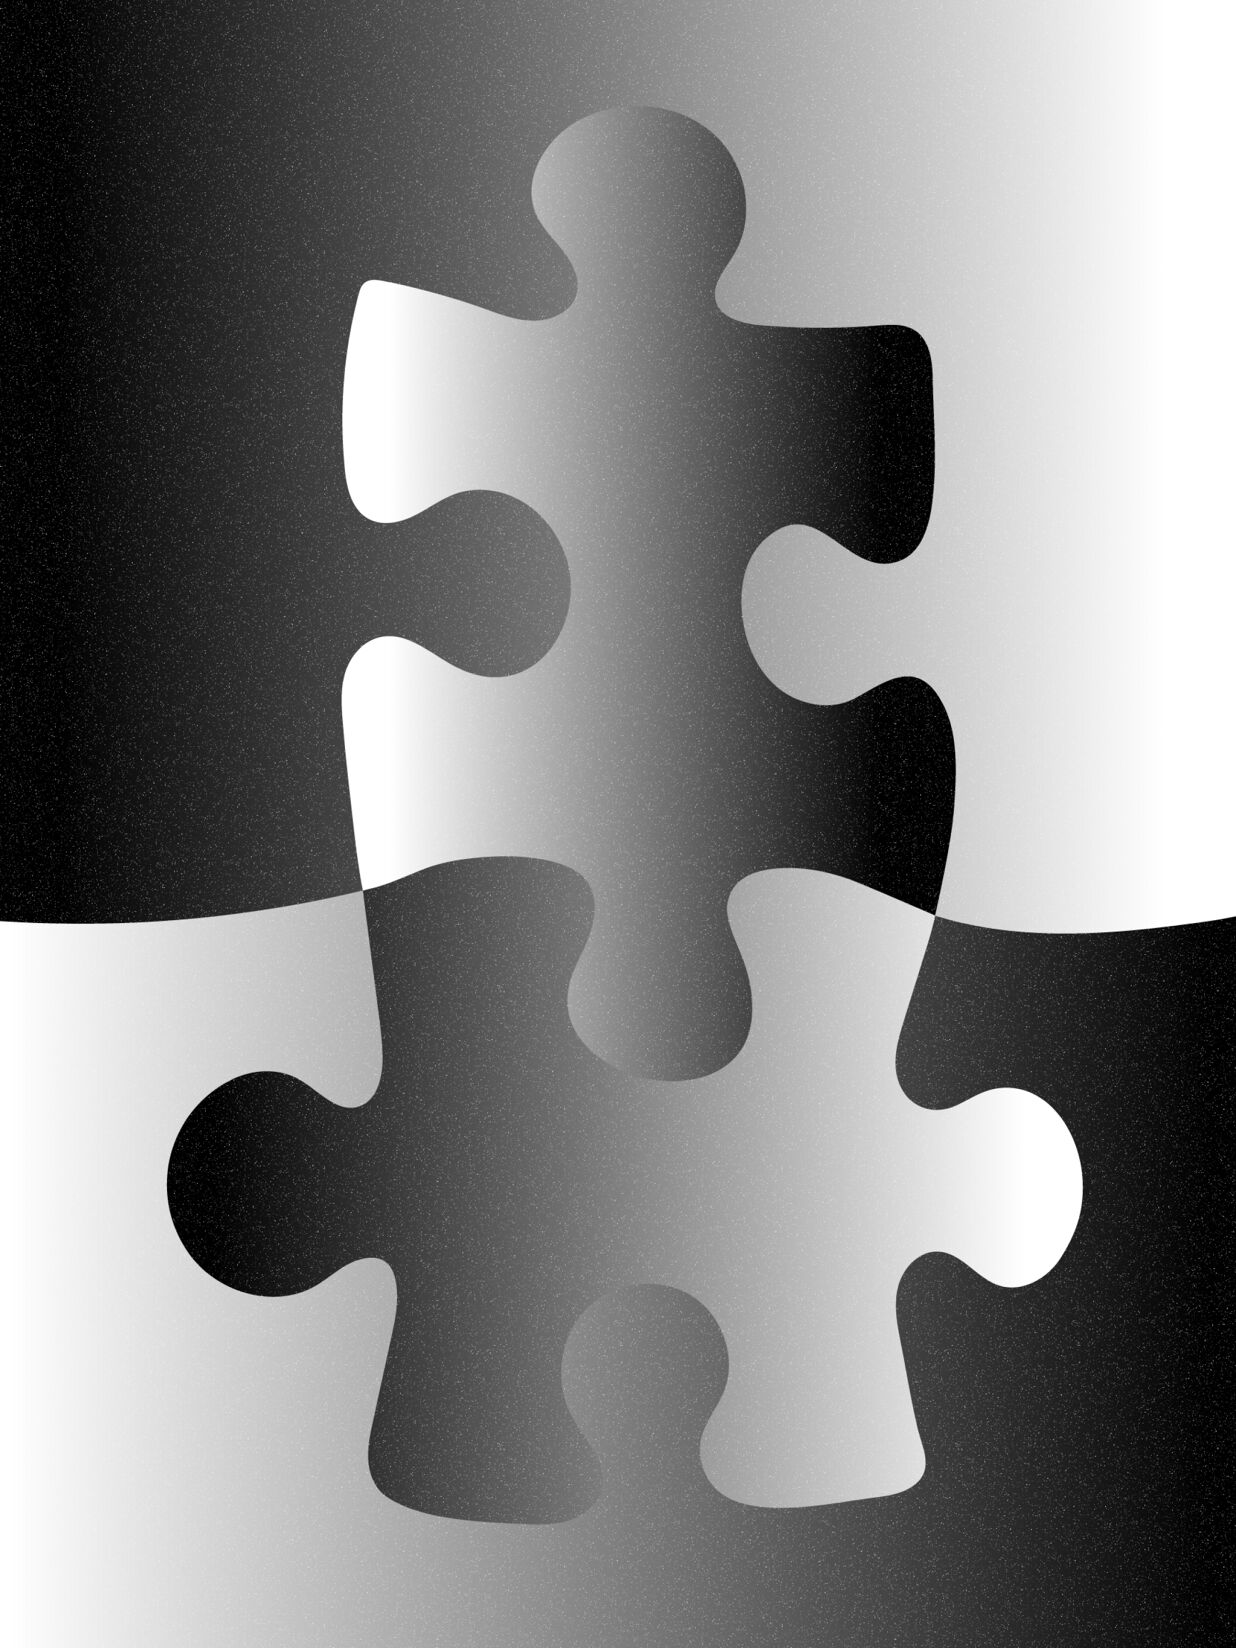 two puzzle pieces fitting together